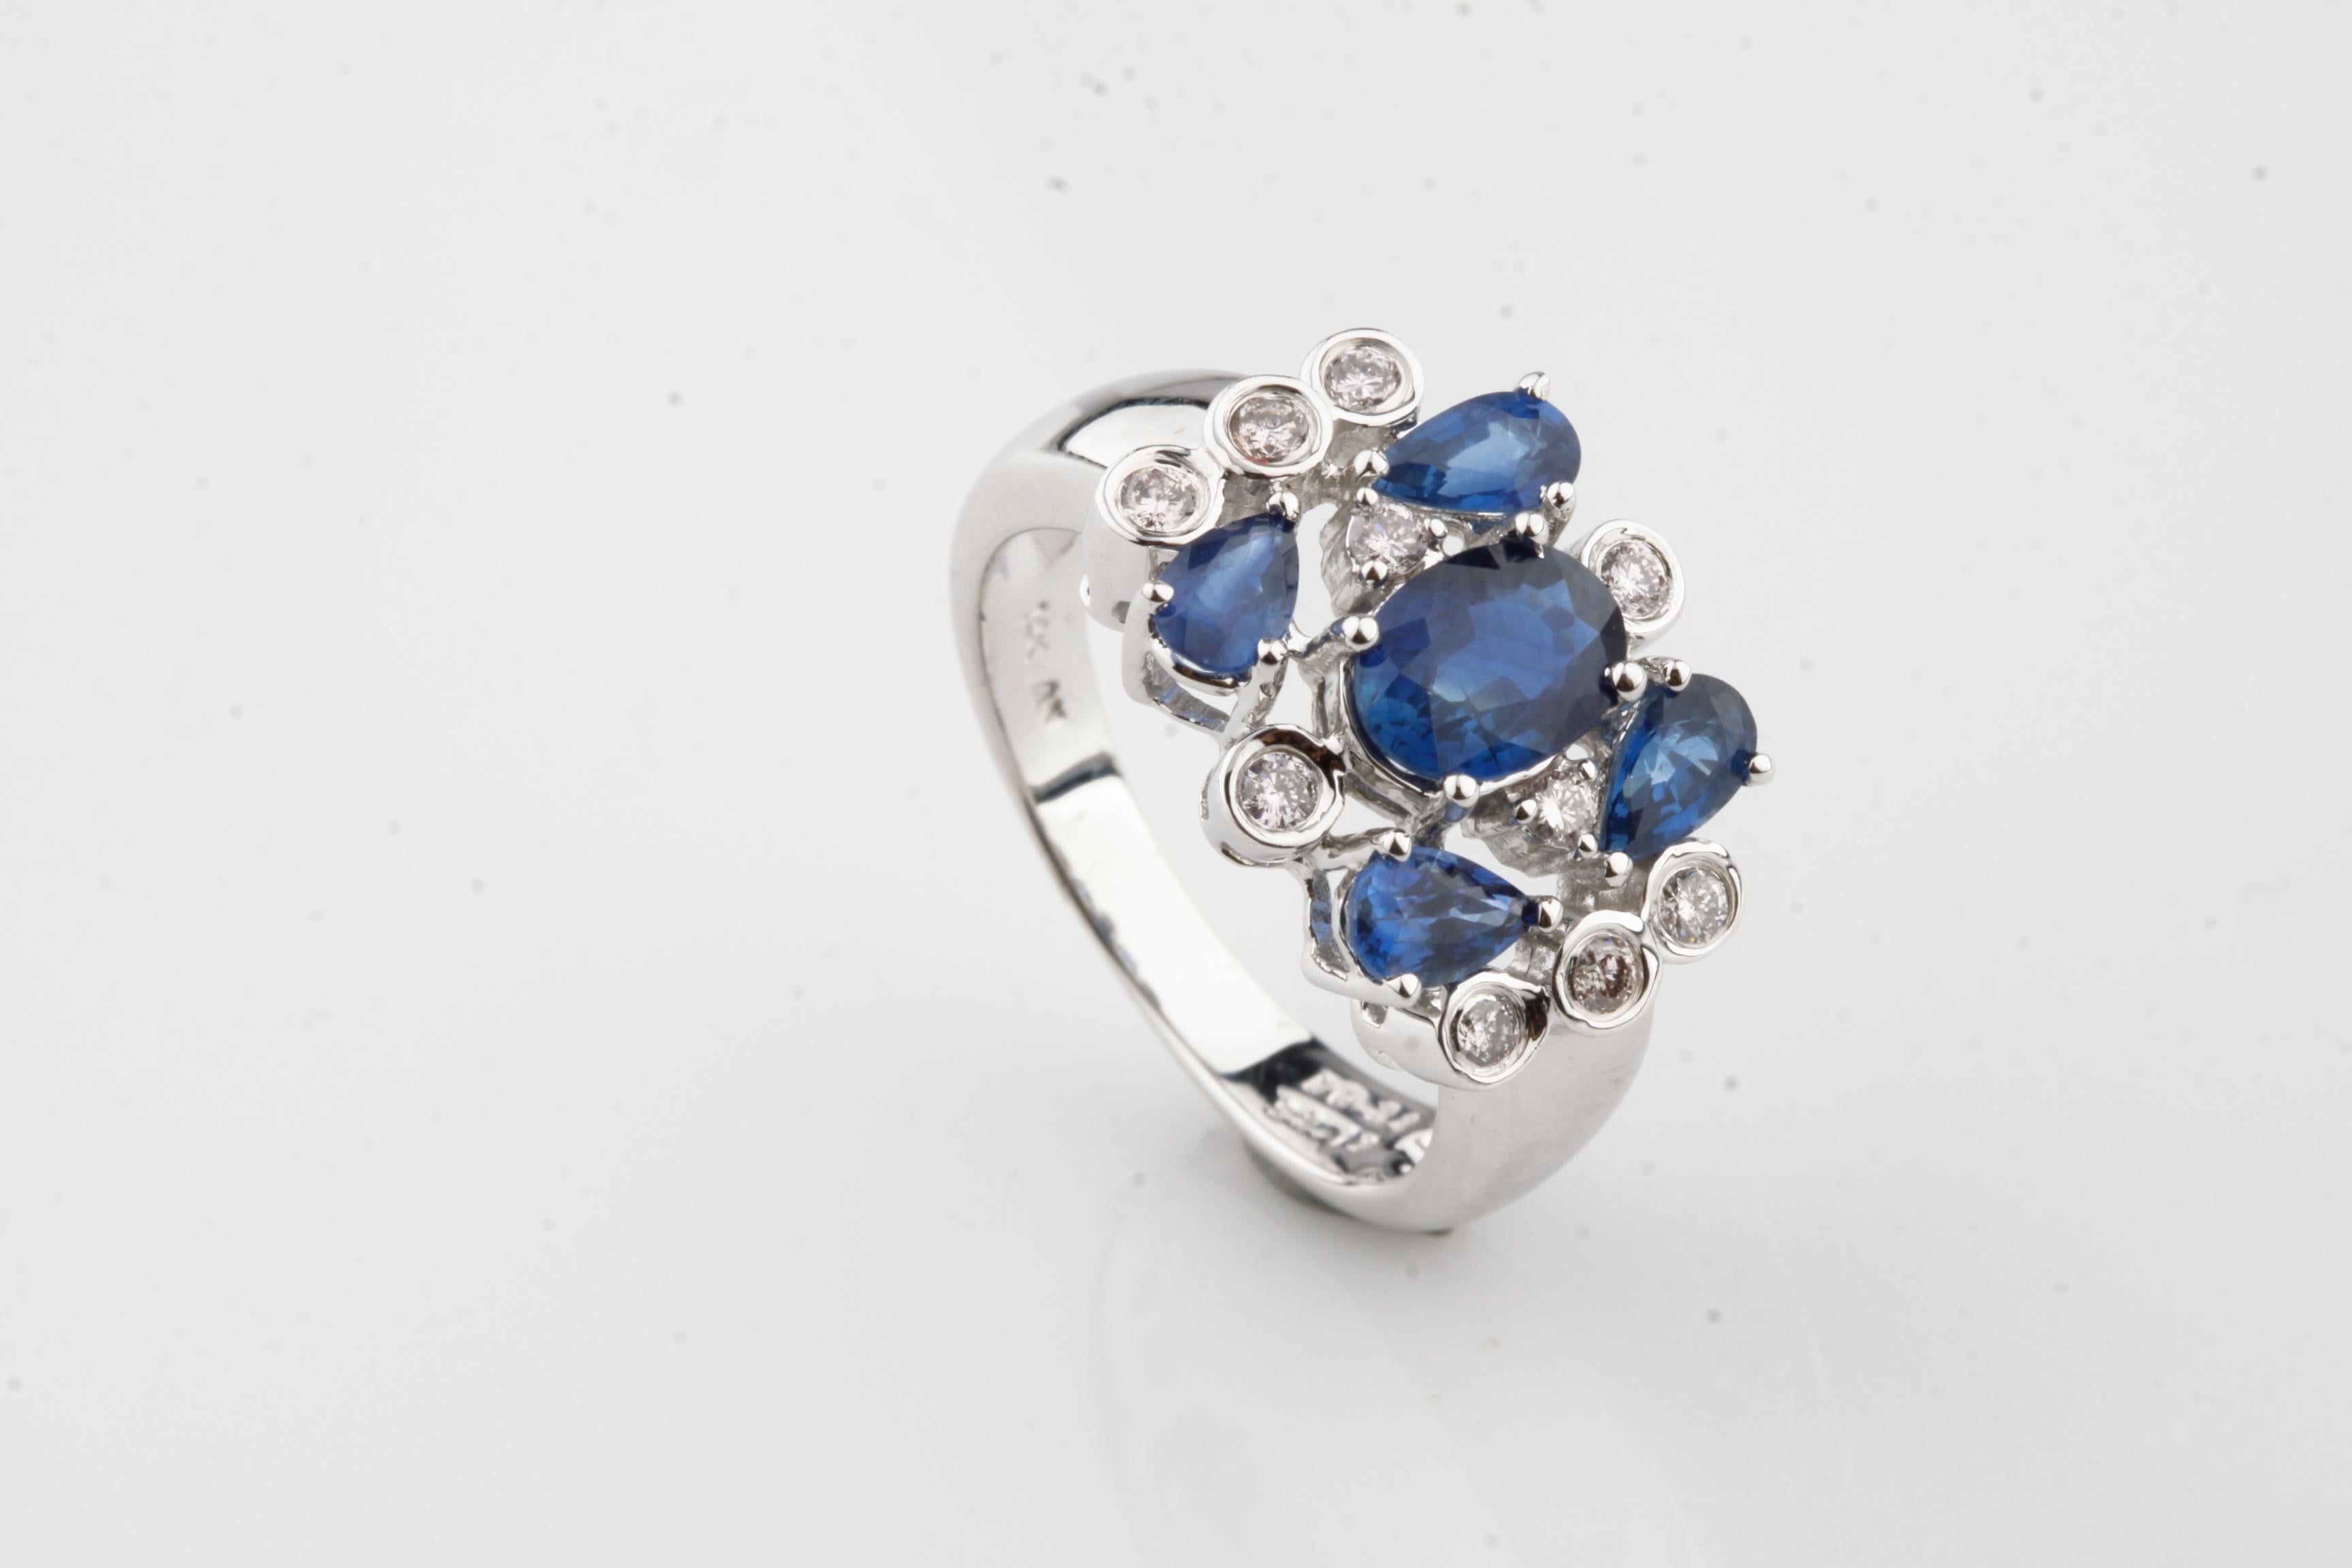 One Electronically tested 14k white gold ladies cast sapphire & diamond cluster ring with a bright finish. Condition is new, good workmanship. Trademark is An. Identified with markings of 